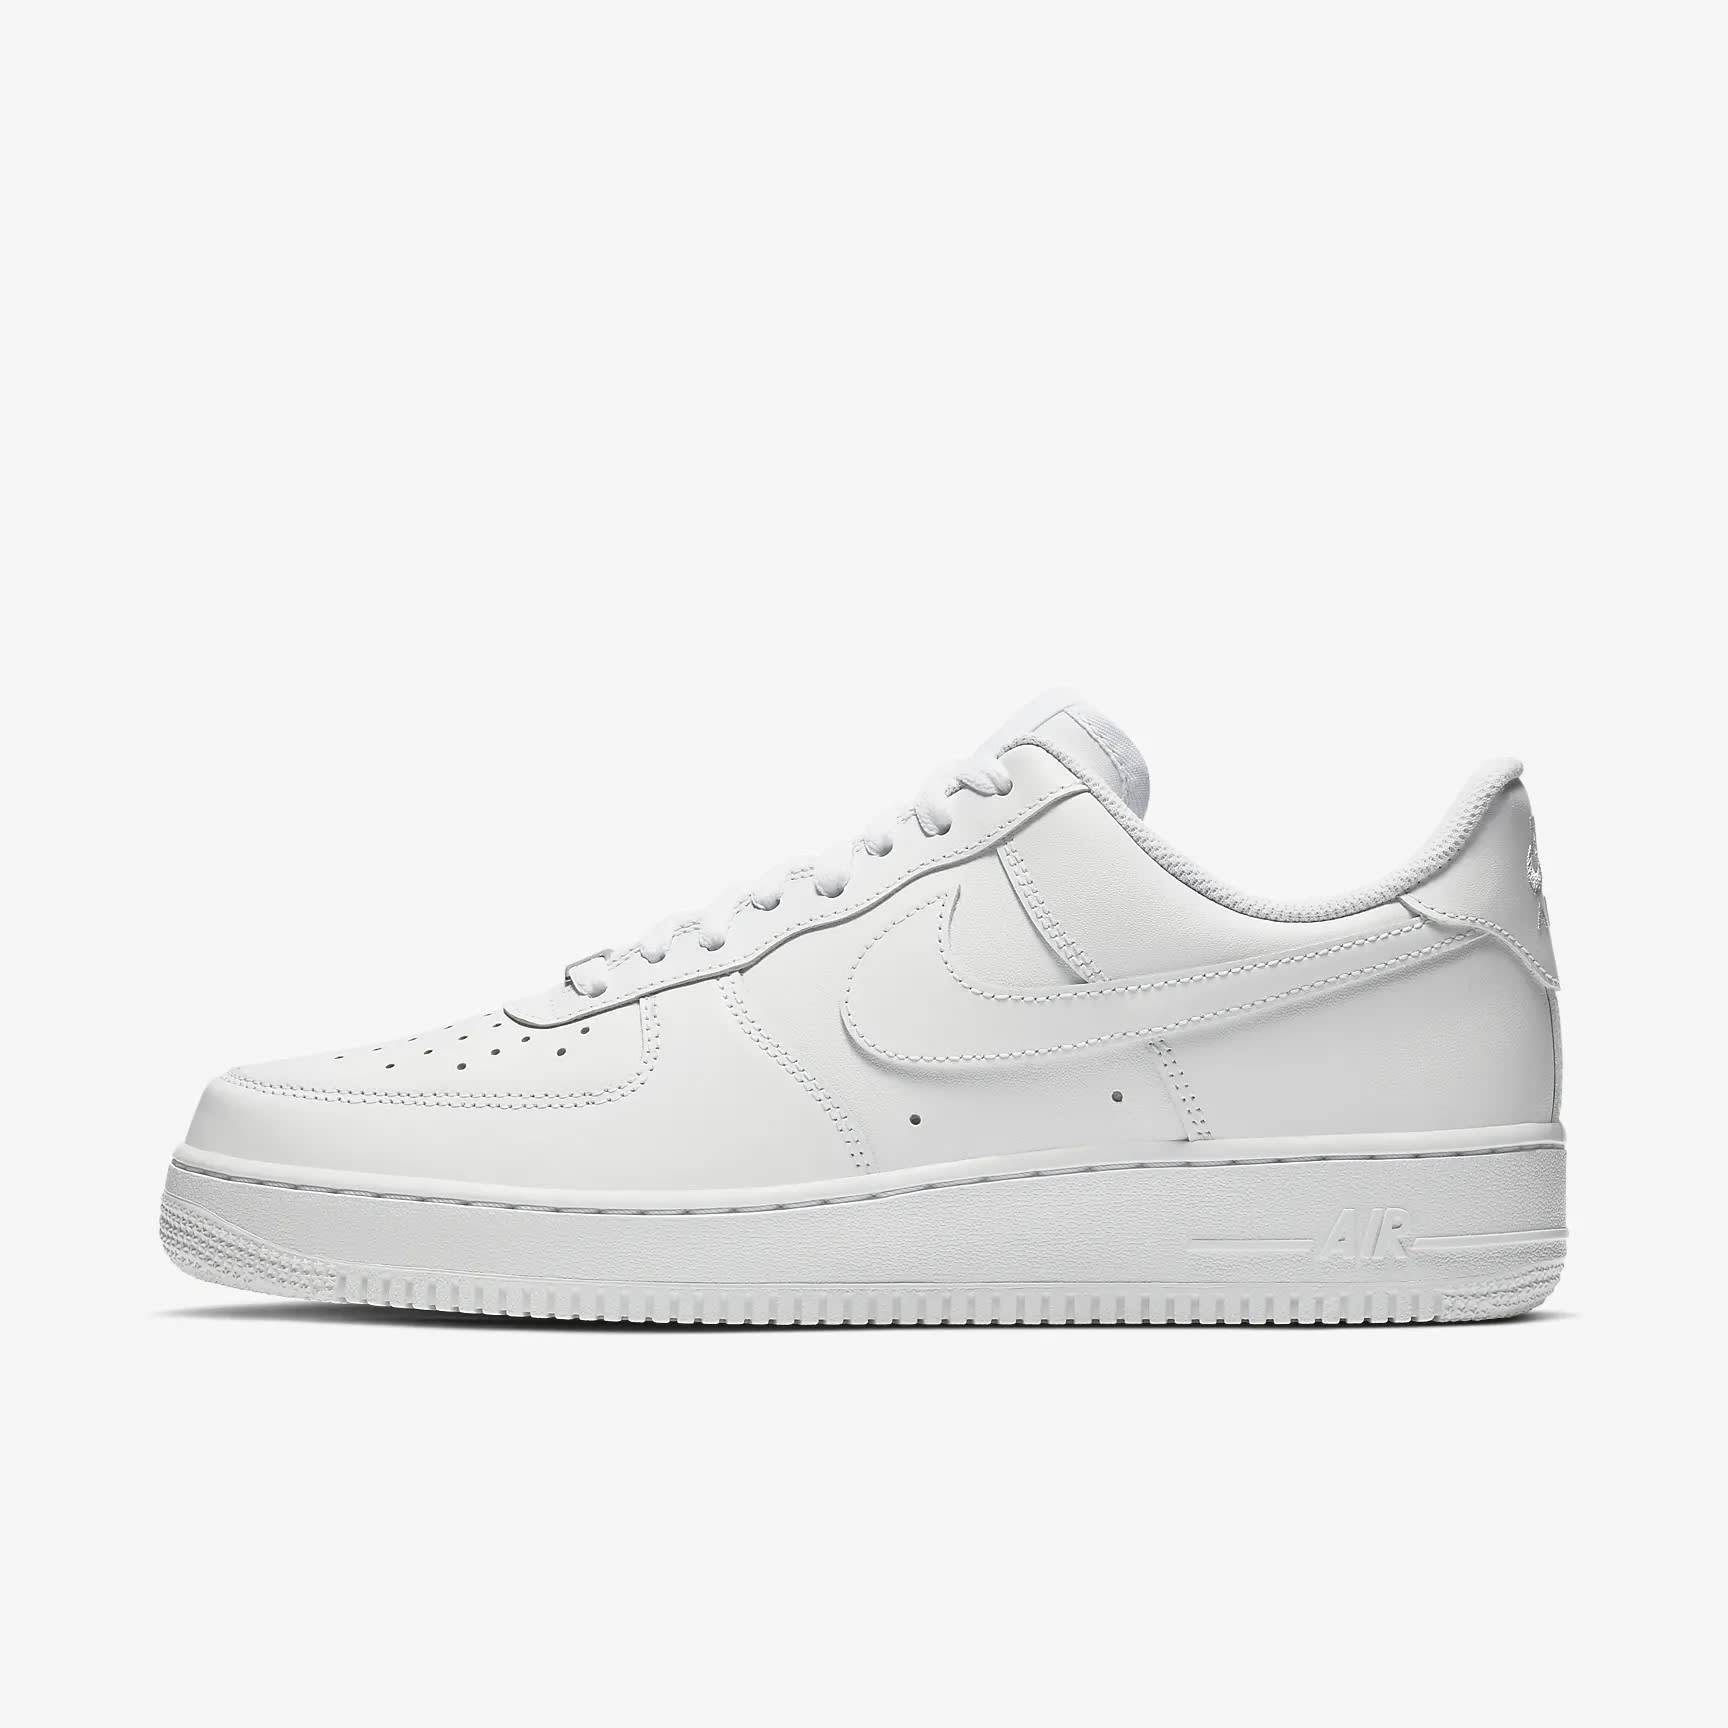 Best Nike Air Force 1 ‘07 Price & Reviews in Malaysia 2023